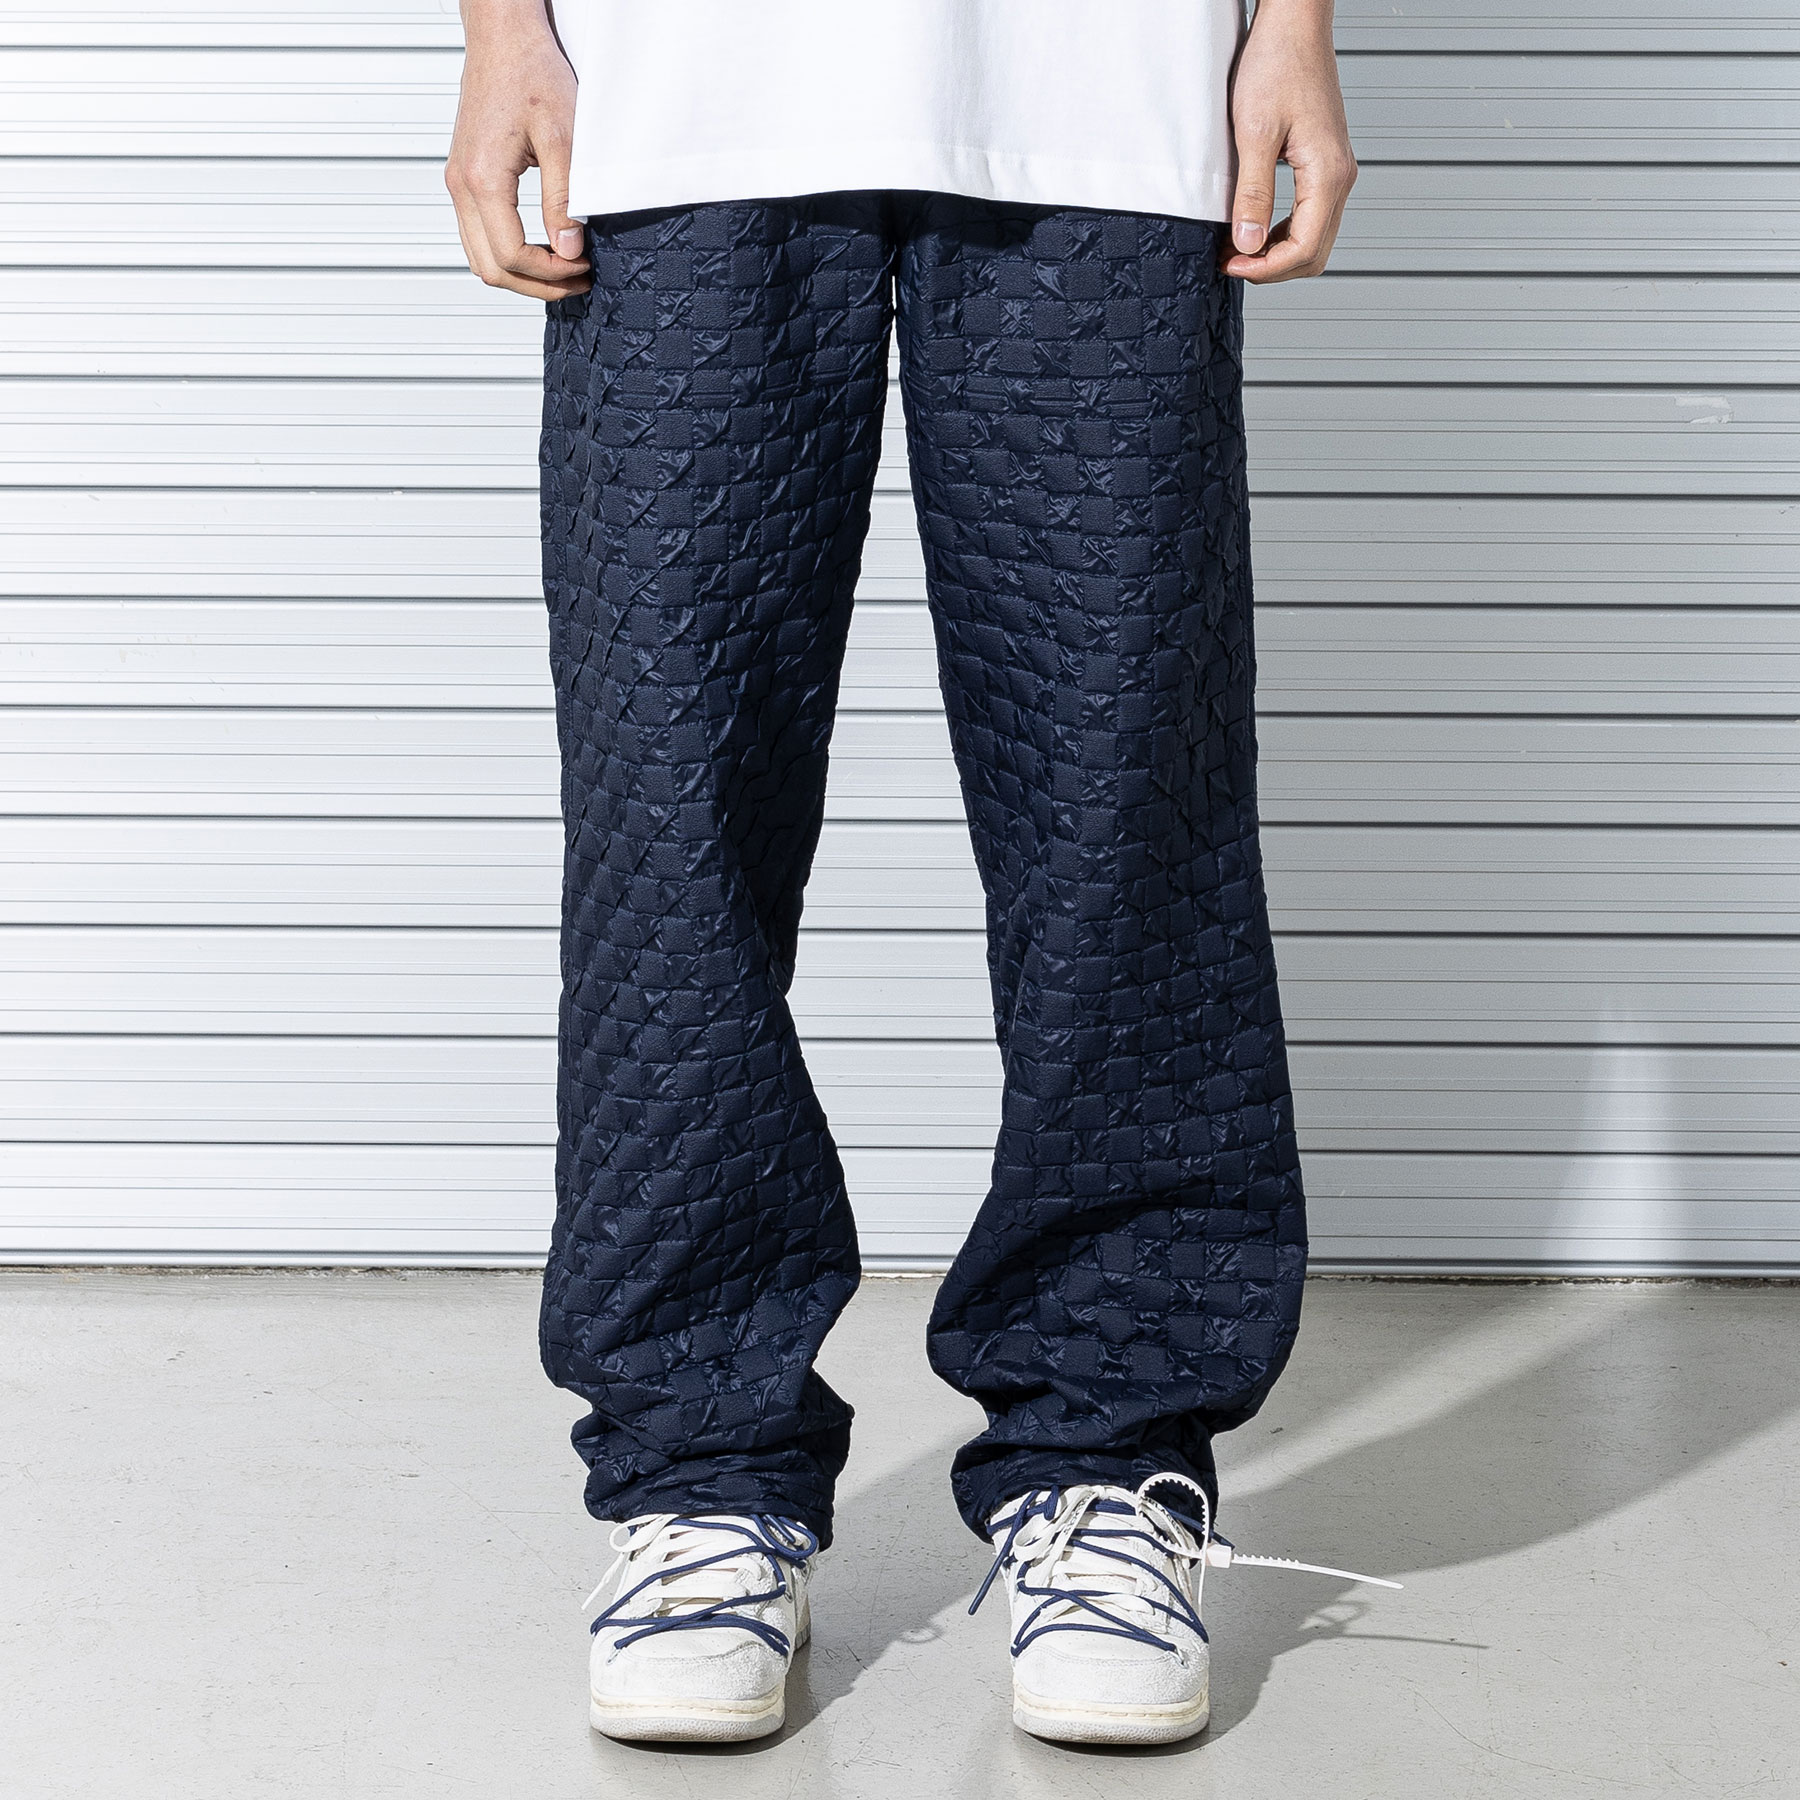 CHECKERBOARD TRACK PANTS MSTTP003-NV